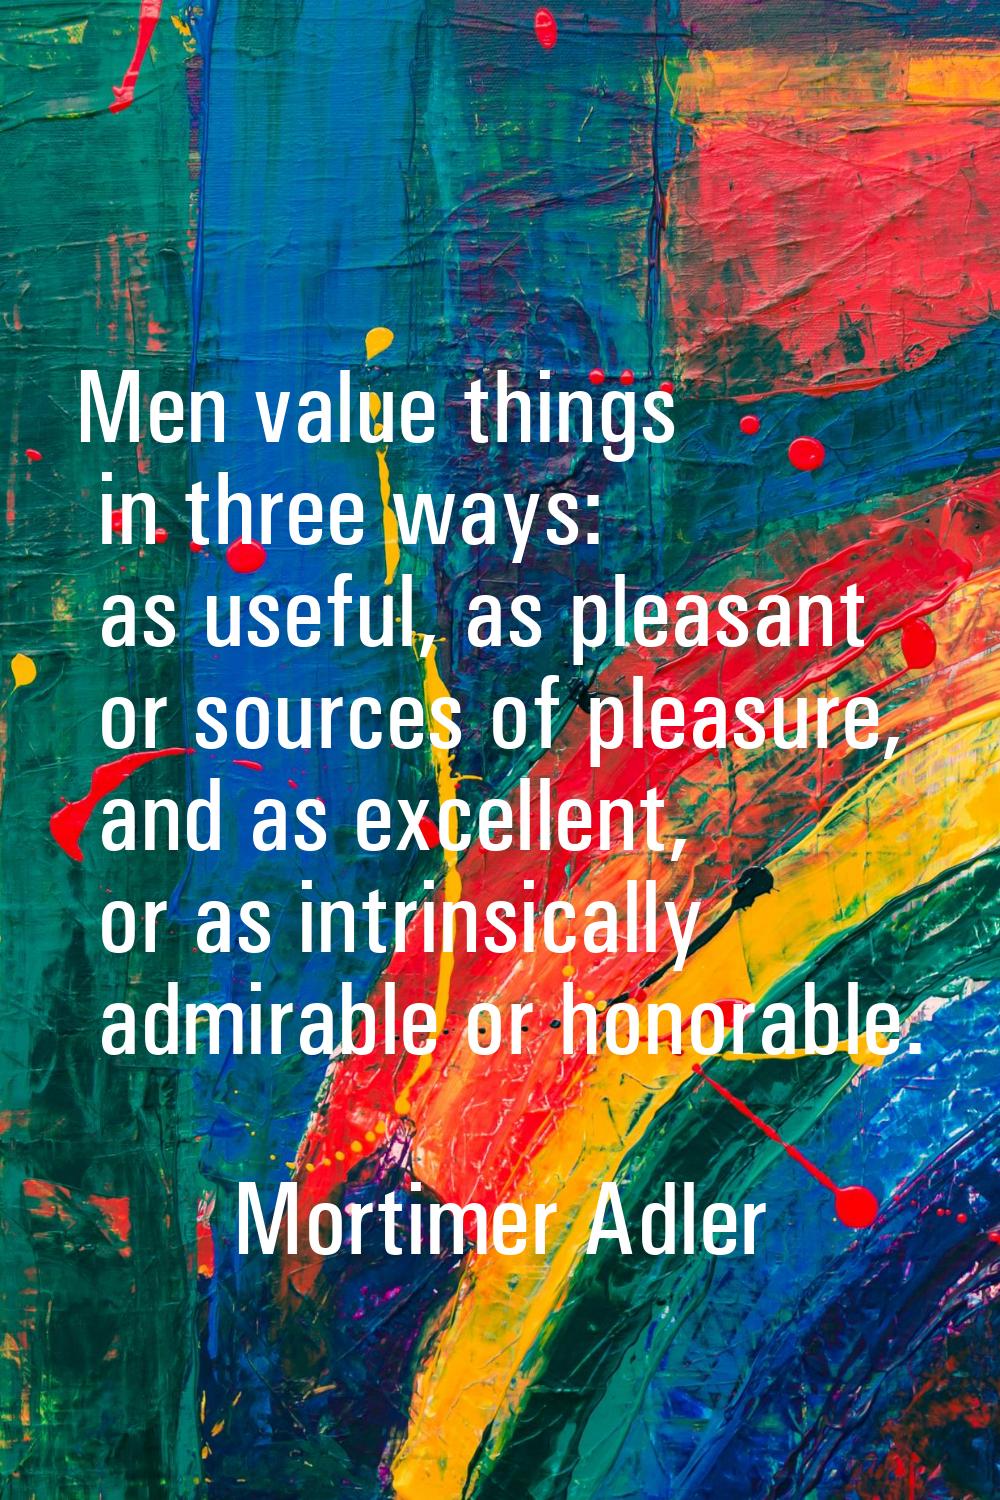 Men value things in three ways: as useful, as pleasant or sources of pleasure, and as excellent, or